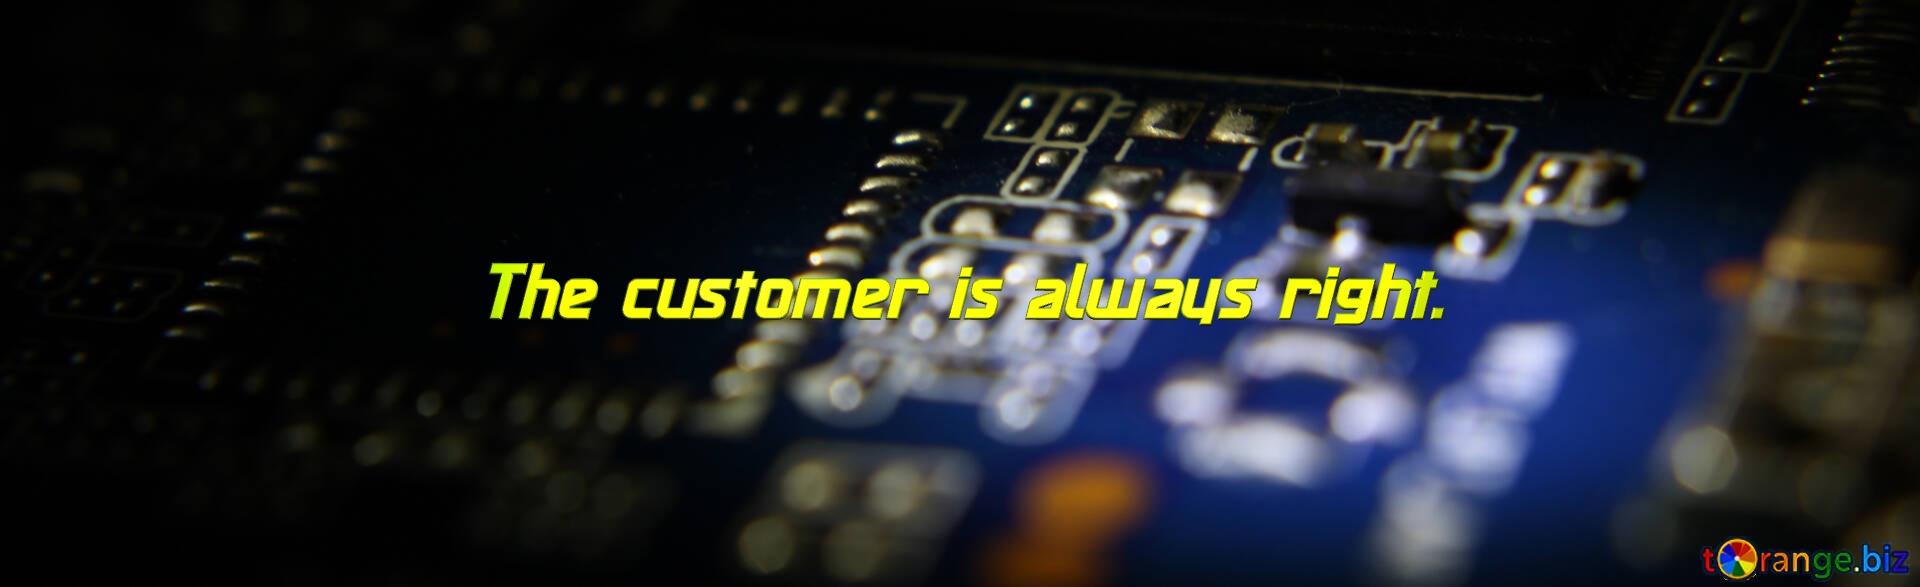 The customer is always right. Cover for Facebook Facebook cover photo electrical engineering and electronics repair №40837